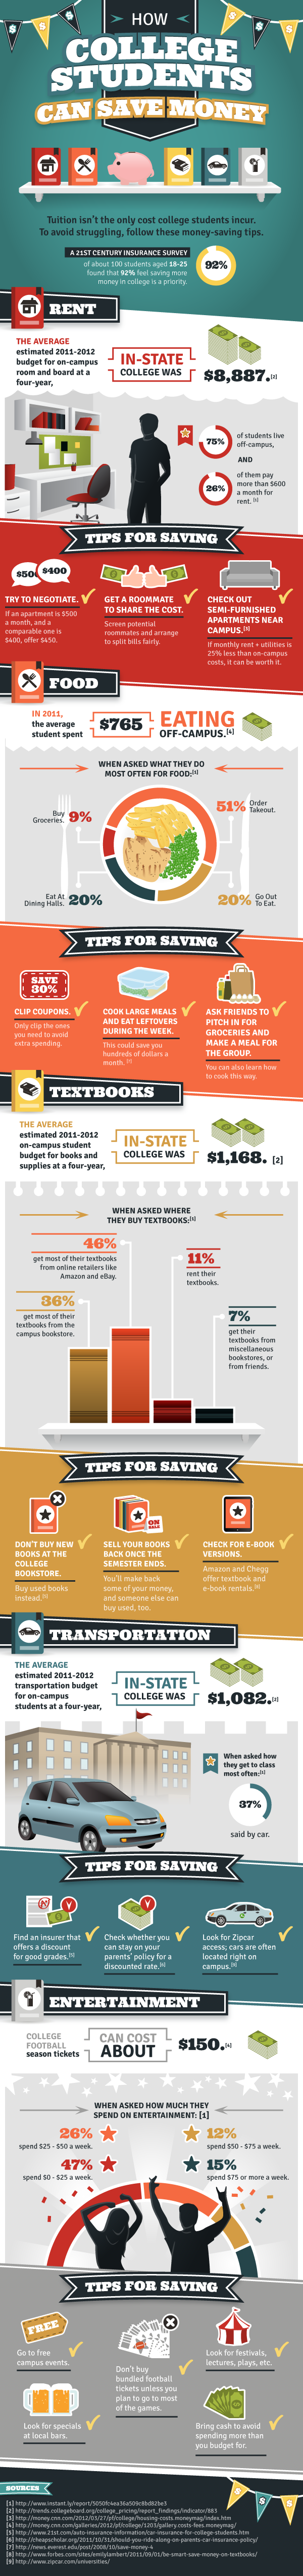 How College Students Can Save